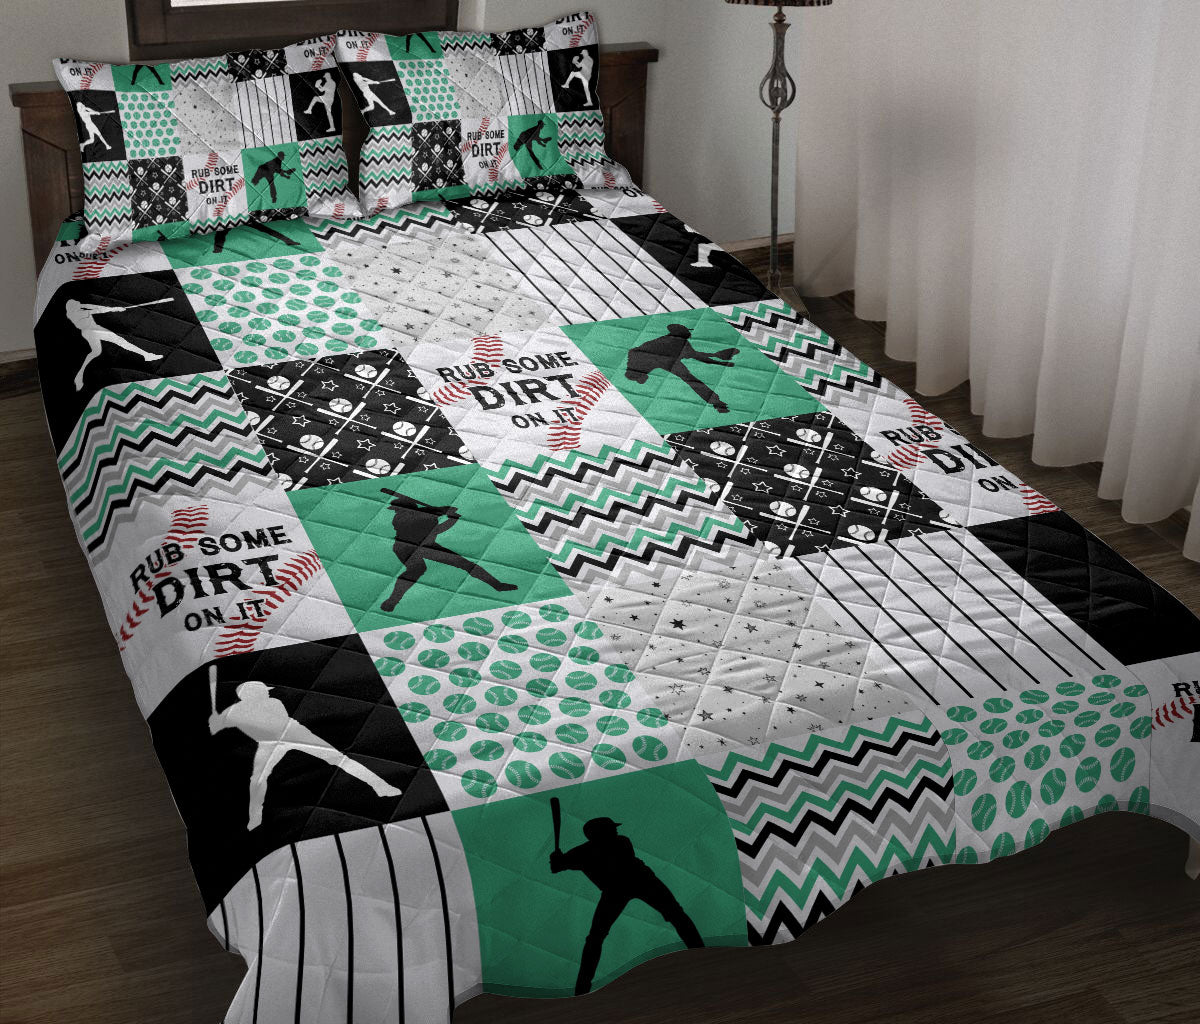 Ohaprints-Quilt-Bed-Set-Pillowcase-Baseball-Patchwork-Pattern-Sports-Lover-Gift-Blanket-Bedspread-Bedding-2439-Throw (55'' x 60'')